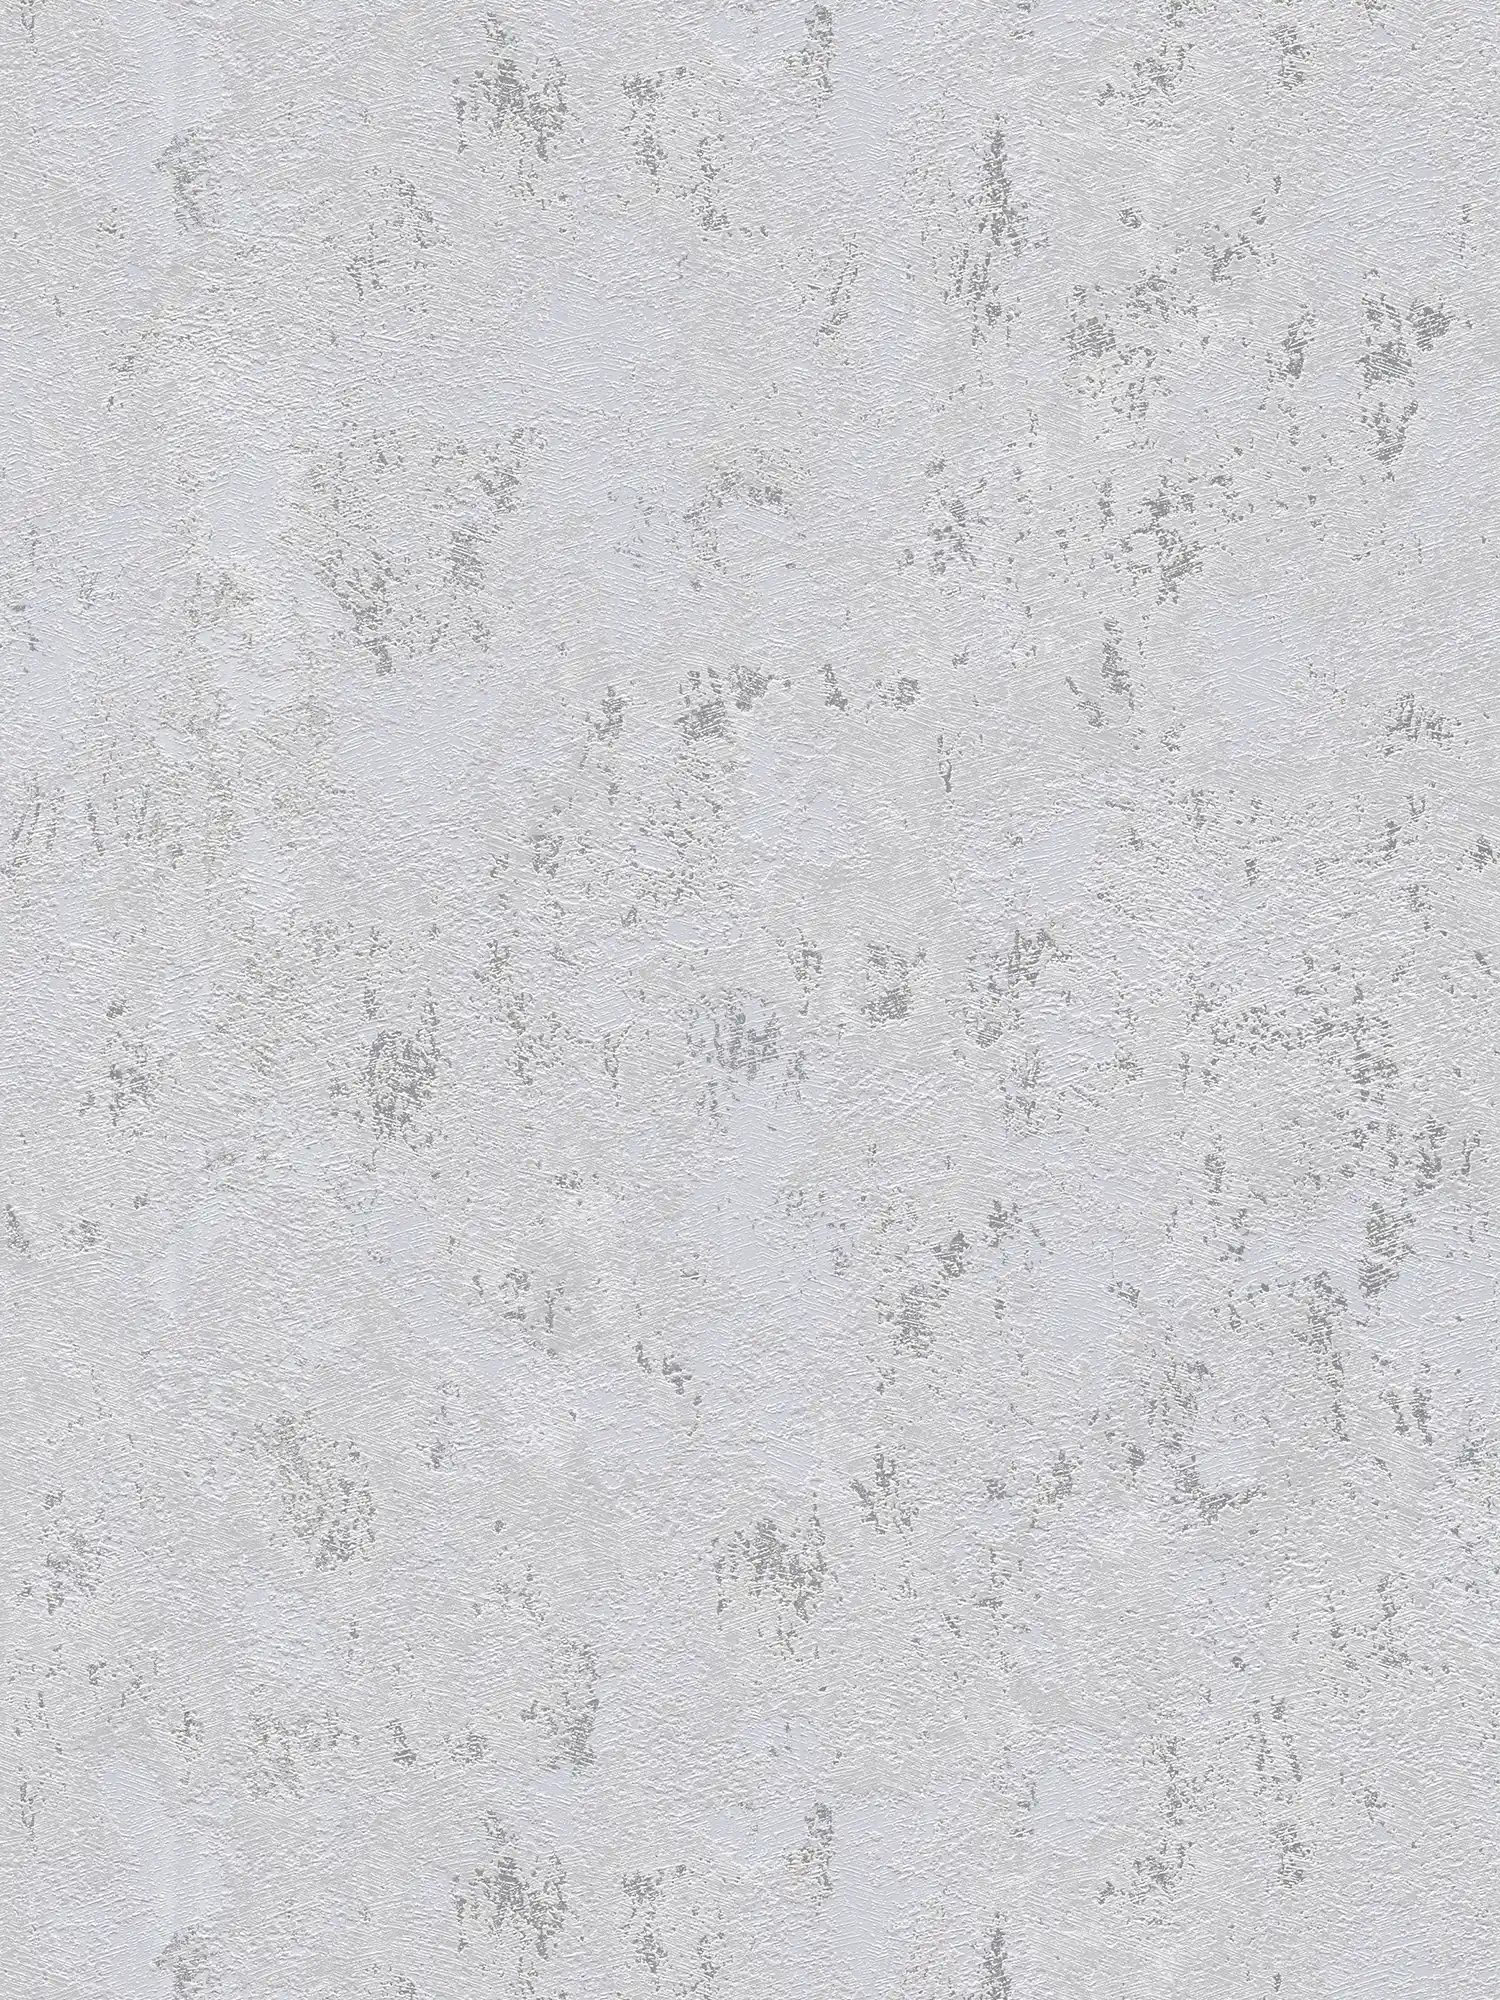 Wallpaper in a coarse plaster look with accents - grey, silver, metallic
